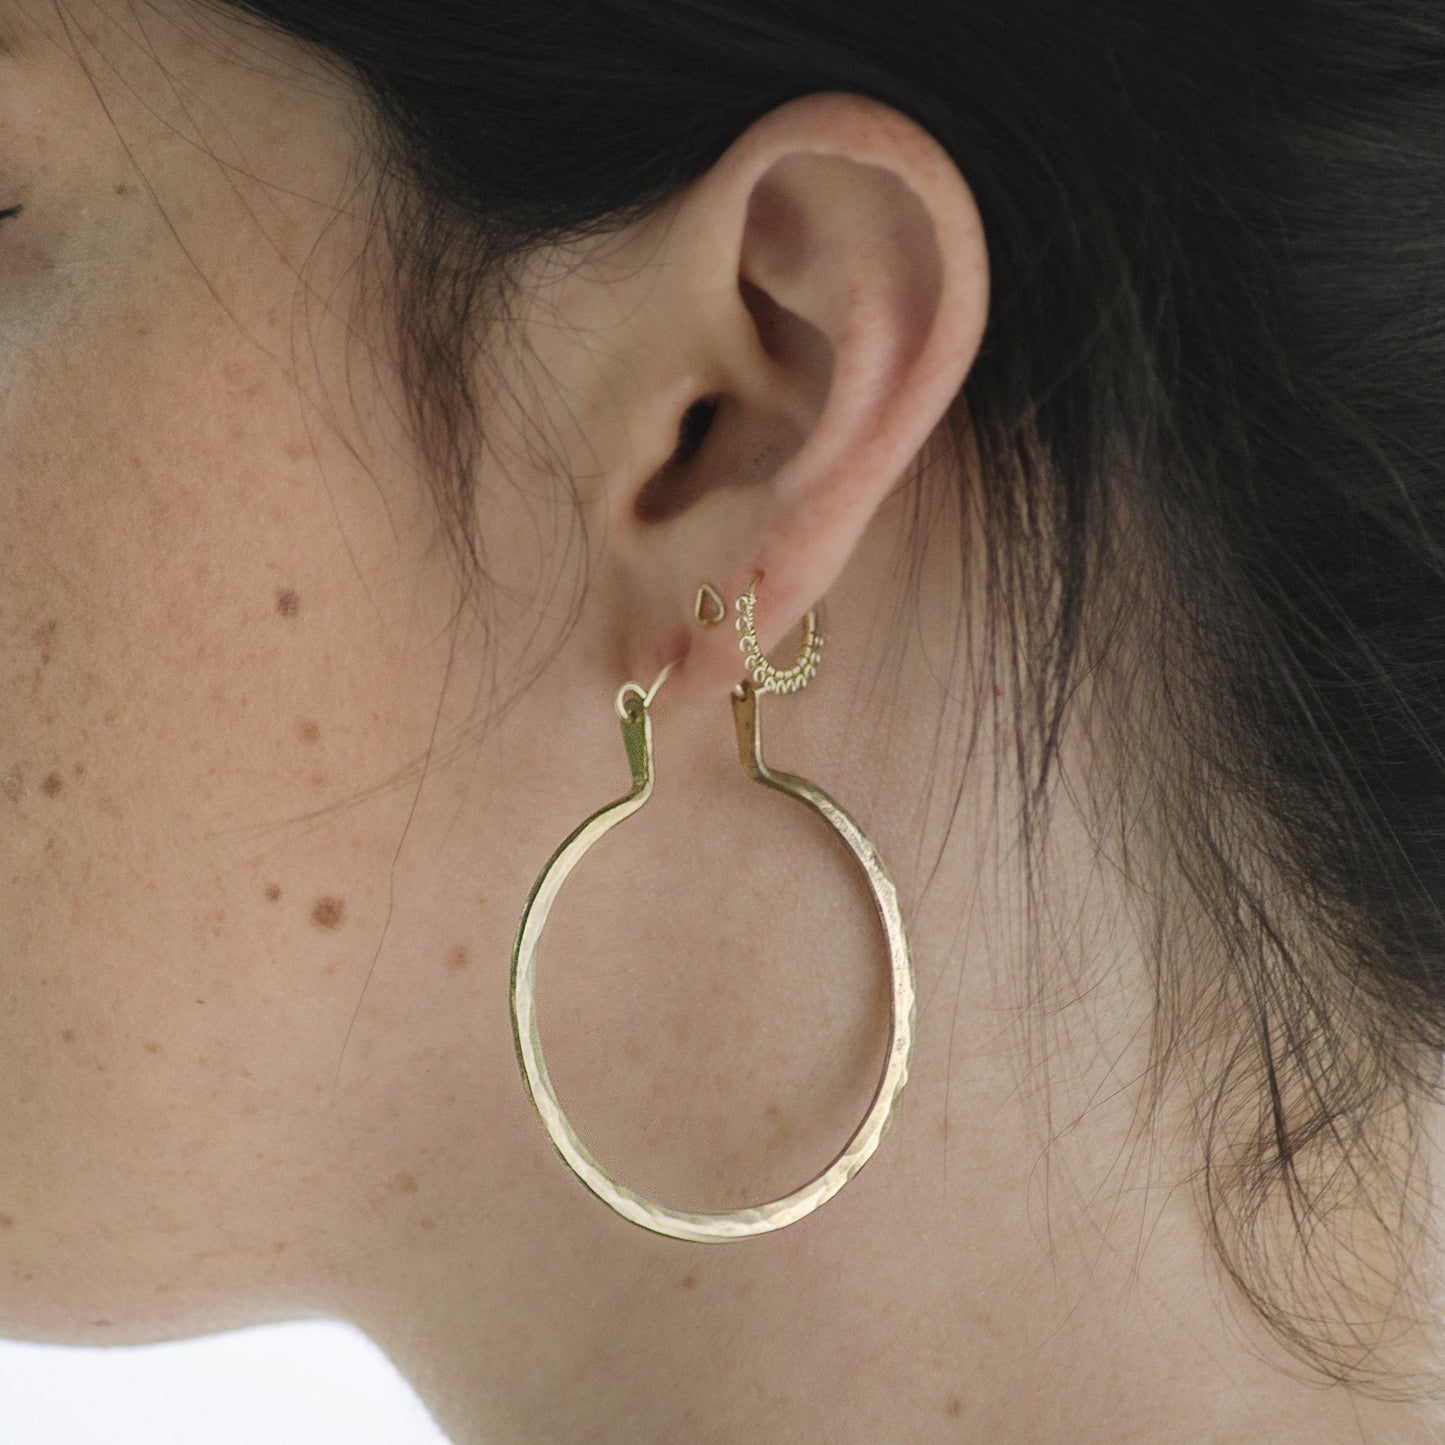 Forged Hoops in Brass